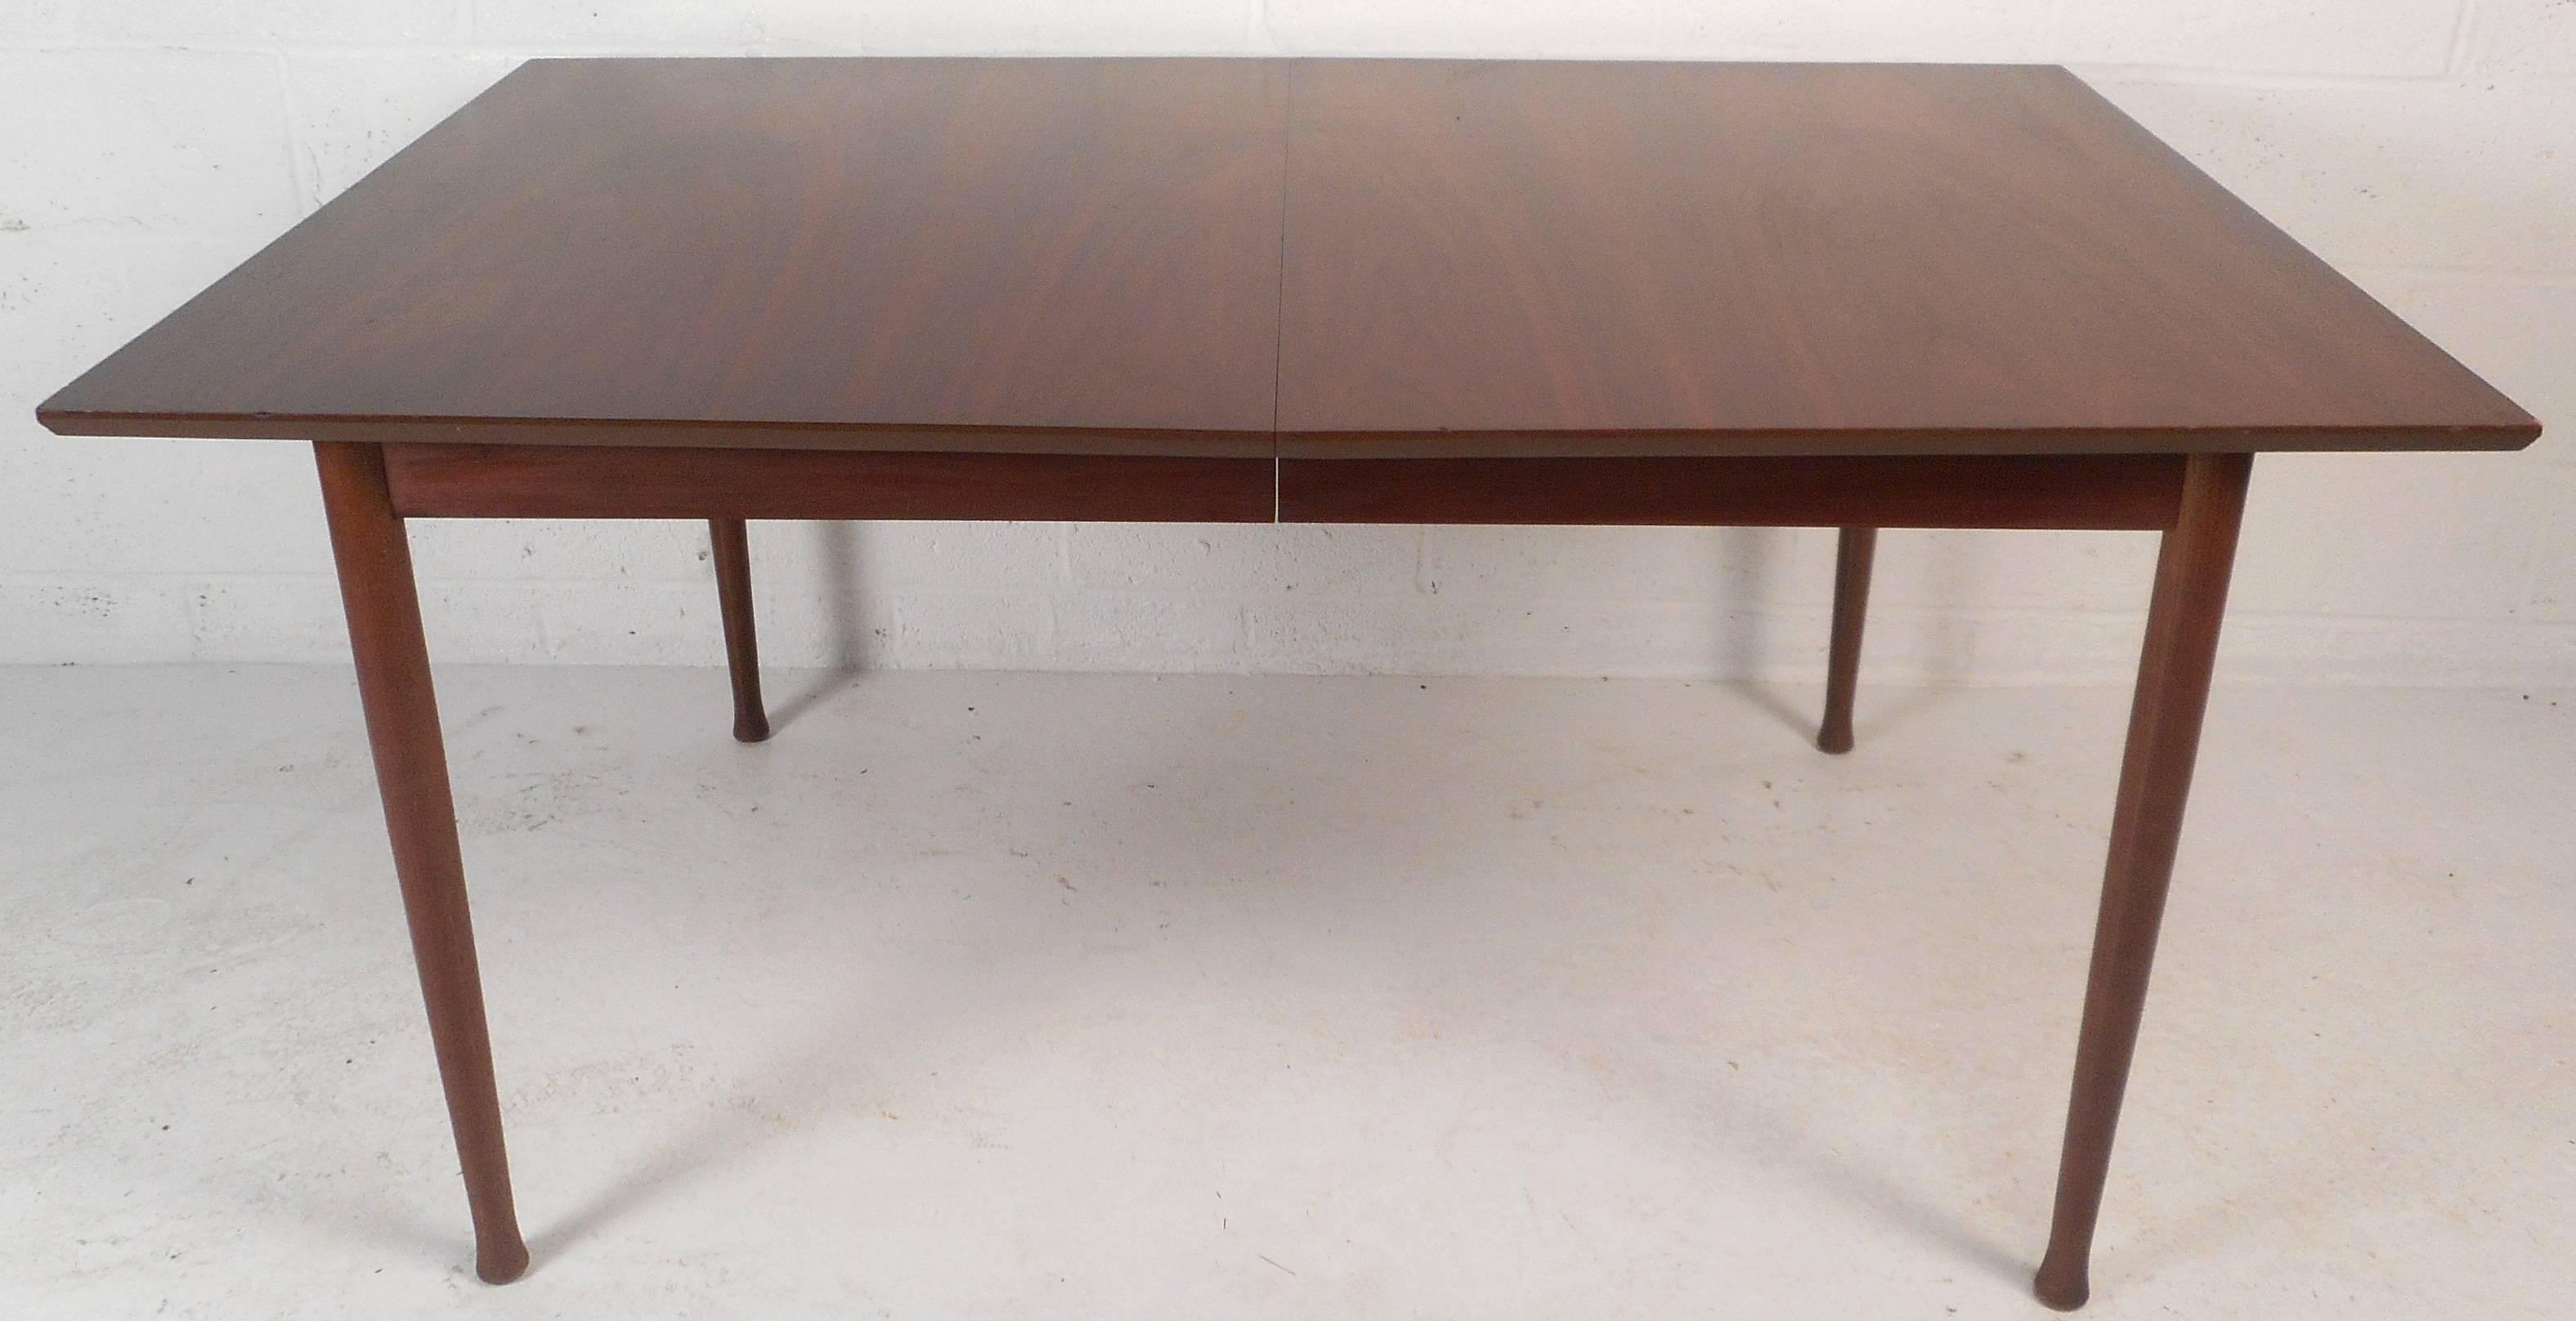 This beautiful vintage modern dining table has rosewood accents along the edges of two sides. Stylish design with unique drum stick legs and elegant wood grain. Sturdy construction with stunning features makes the perfect addition to any modern